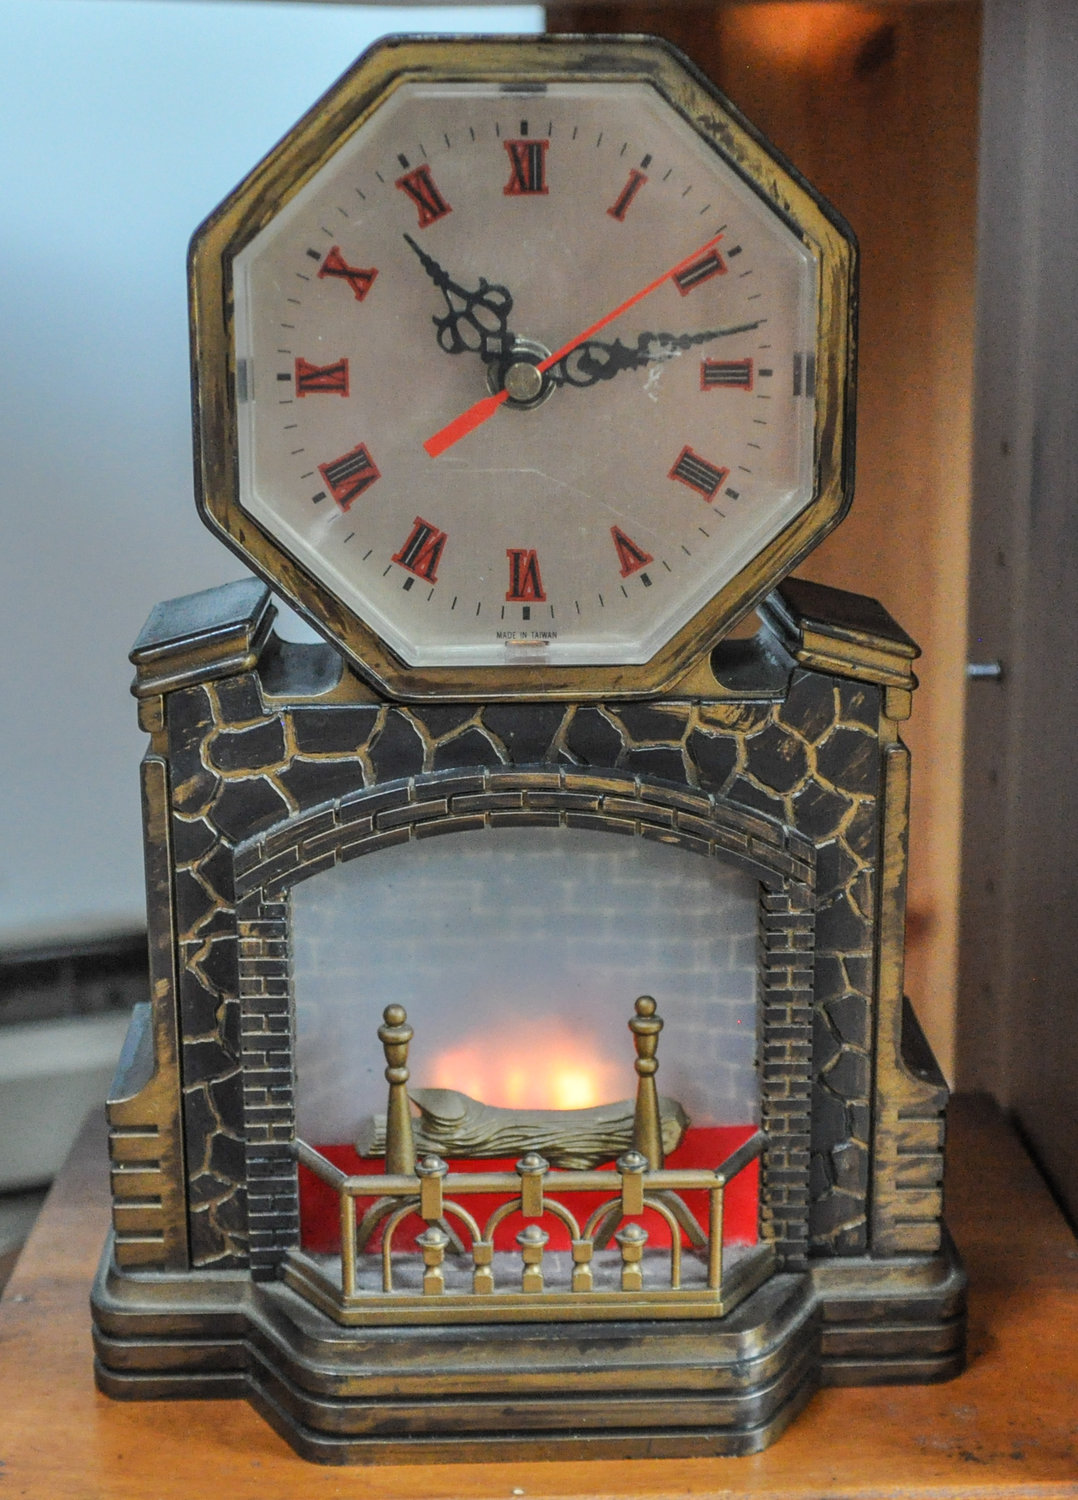 This vintage Mastercrafters light-up flickering-fire-effect clock is one of my faves. A gift from an admirer (what? It happens!) many years ago, it warms my heart just to look at it.